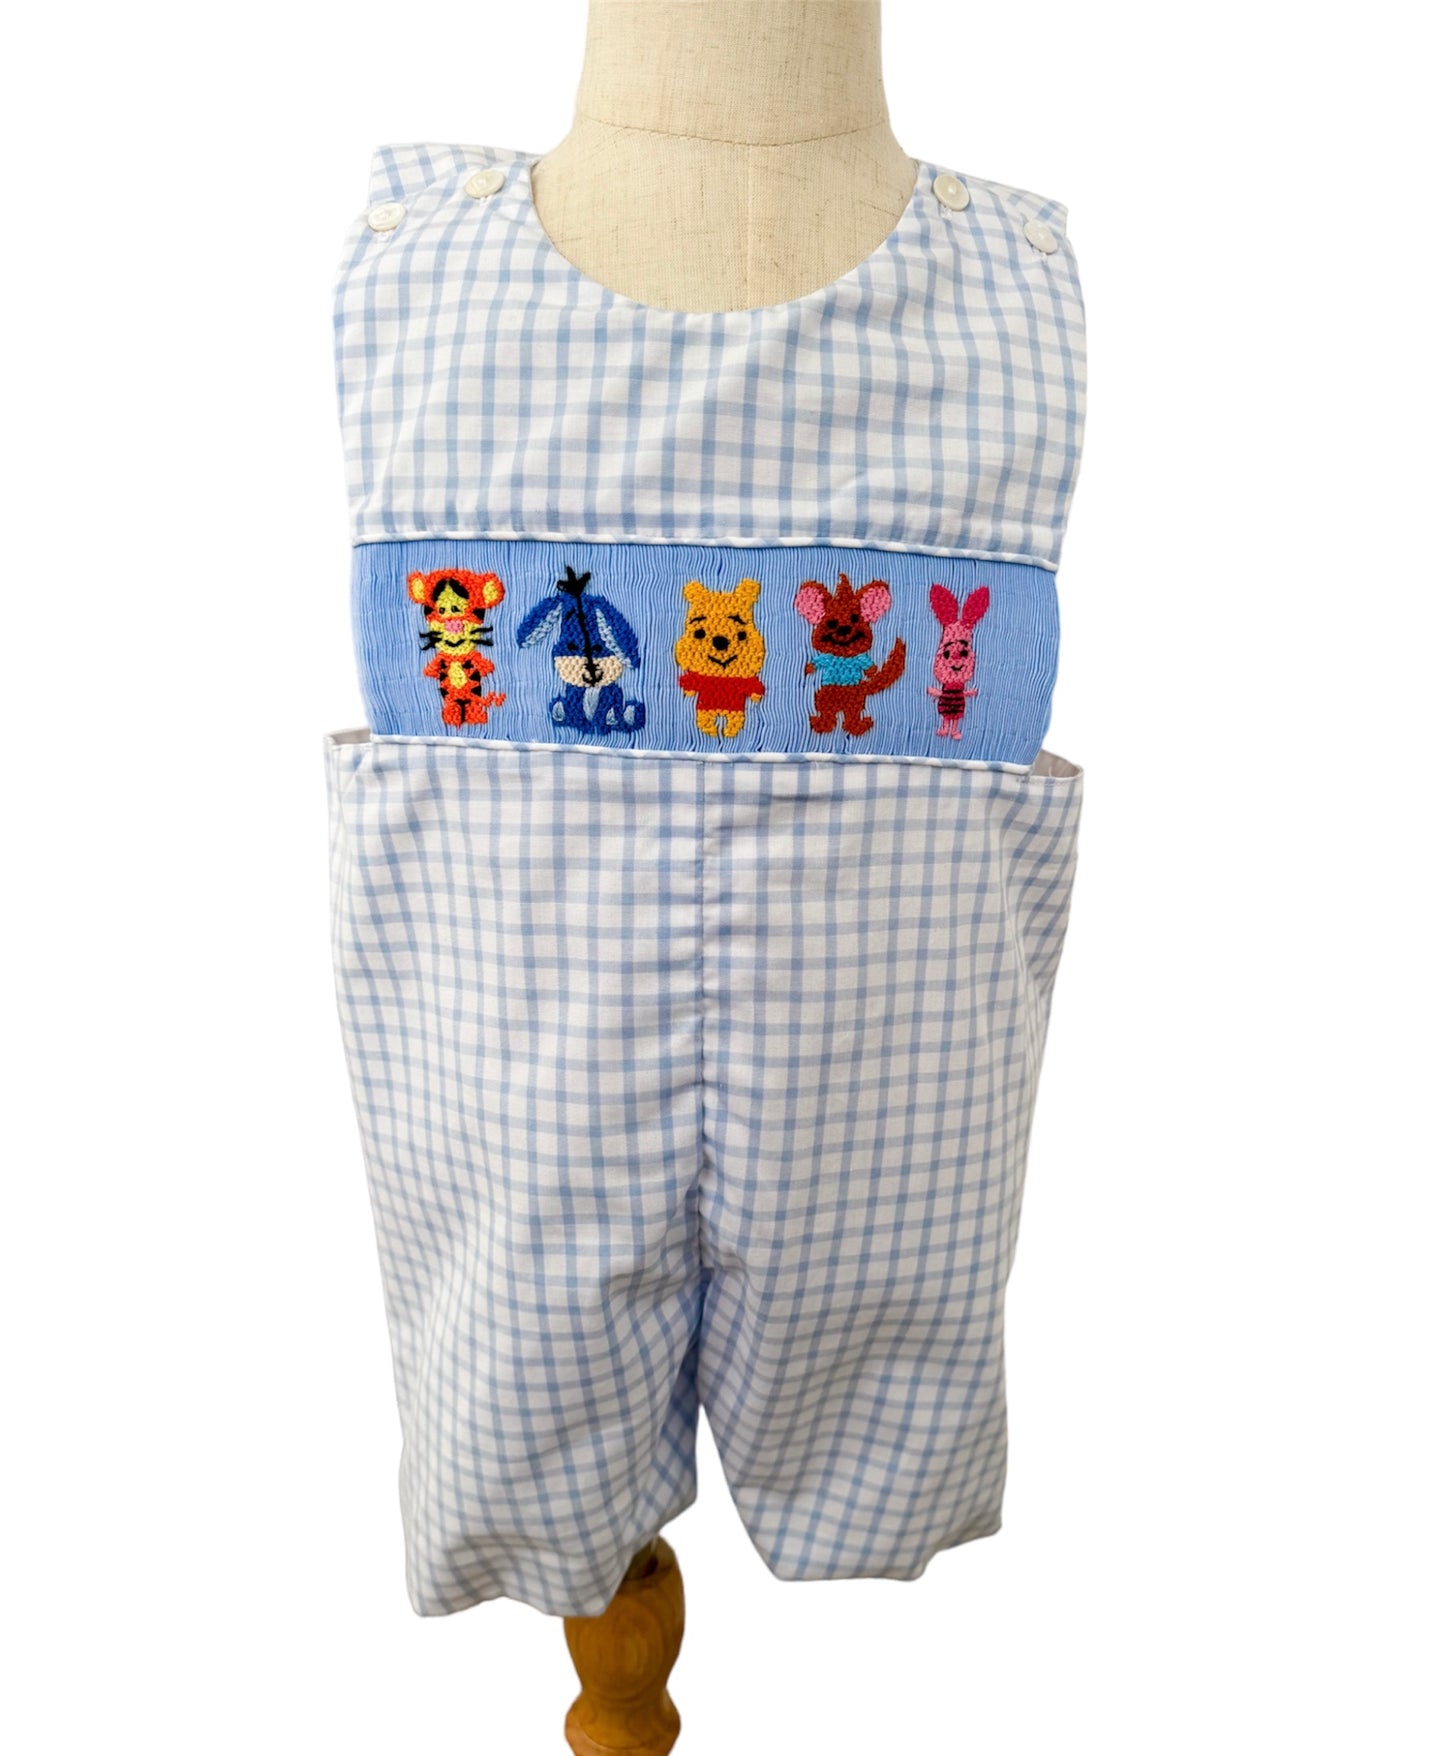 PREORDER 16: Oh, Bother! Hand Smocked Shortall